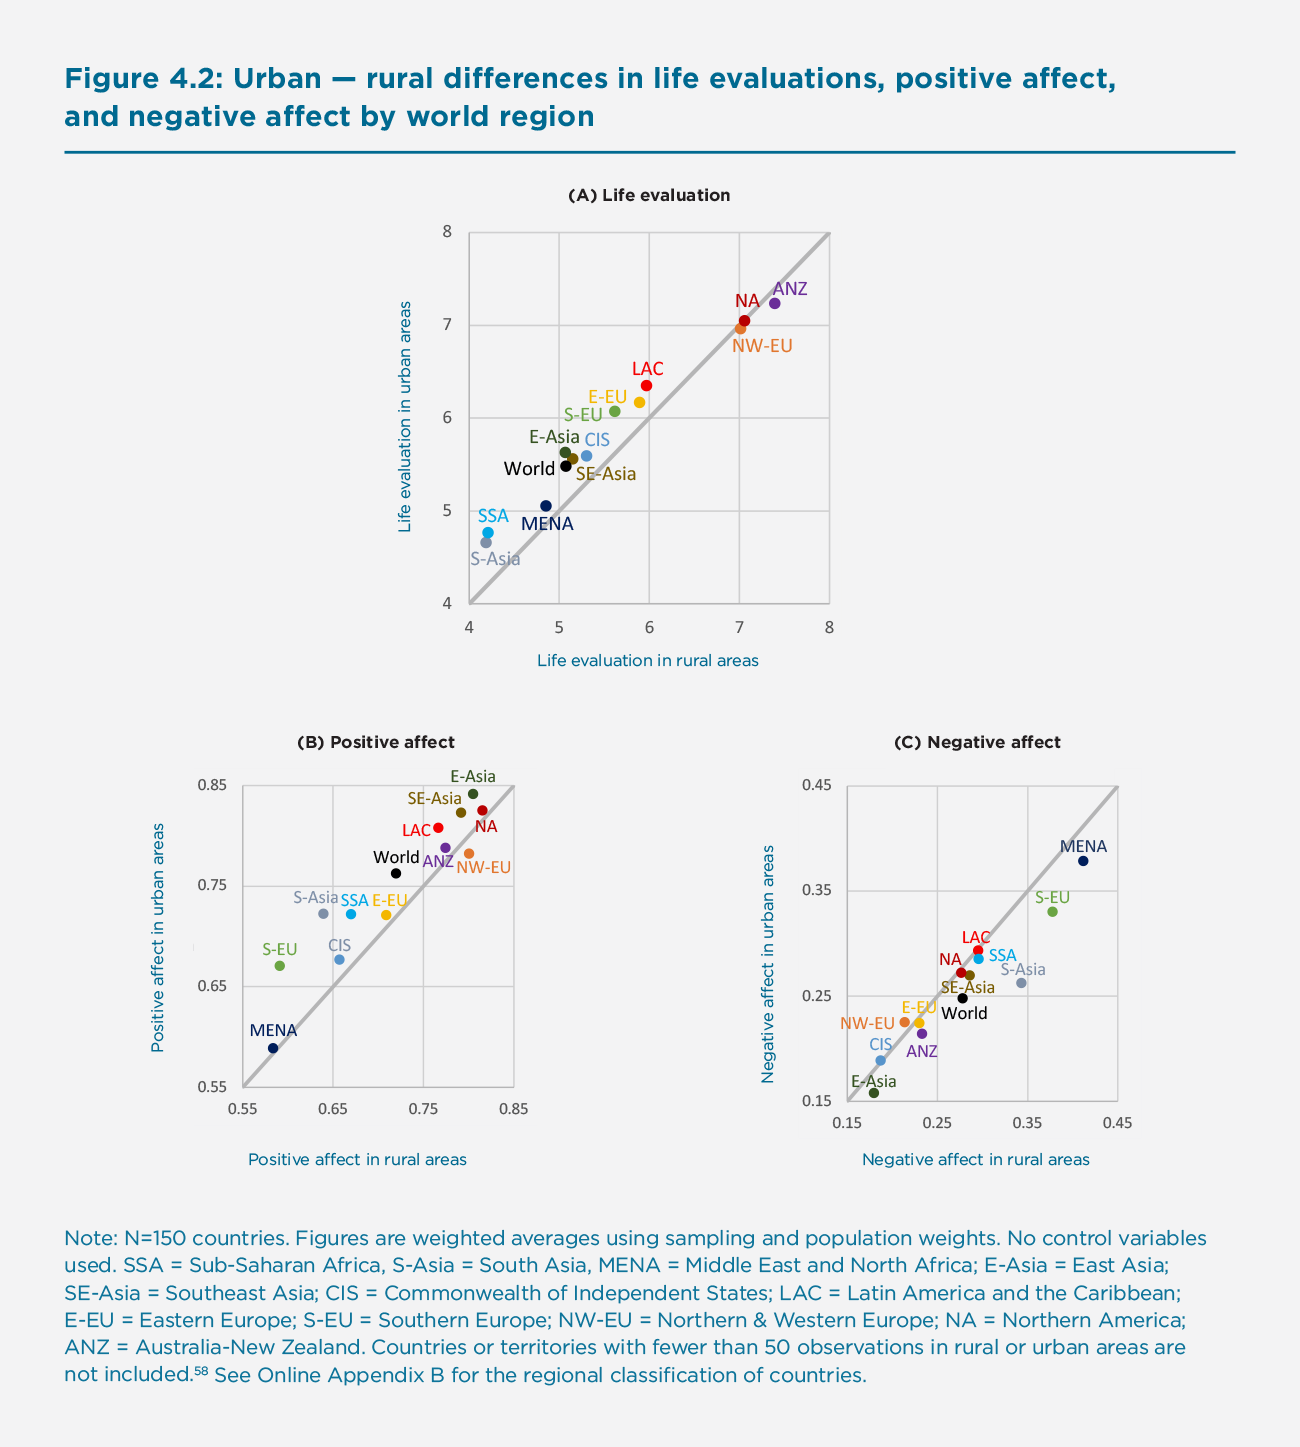 Figure 4.2. Urban – rural differences in life evaluations, positive affect, and negative affect by world region and negative affect by world region